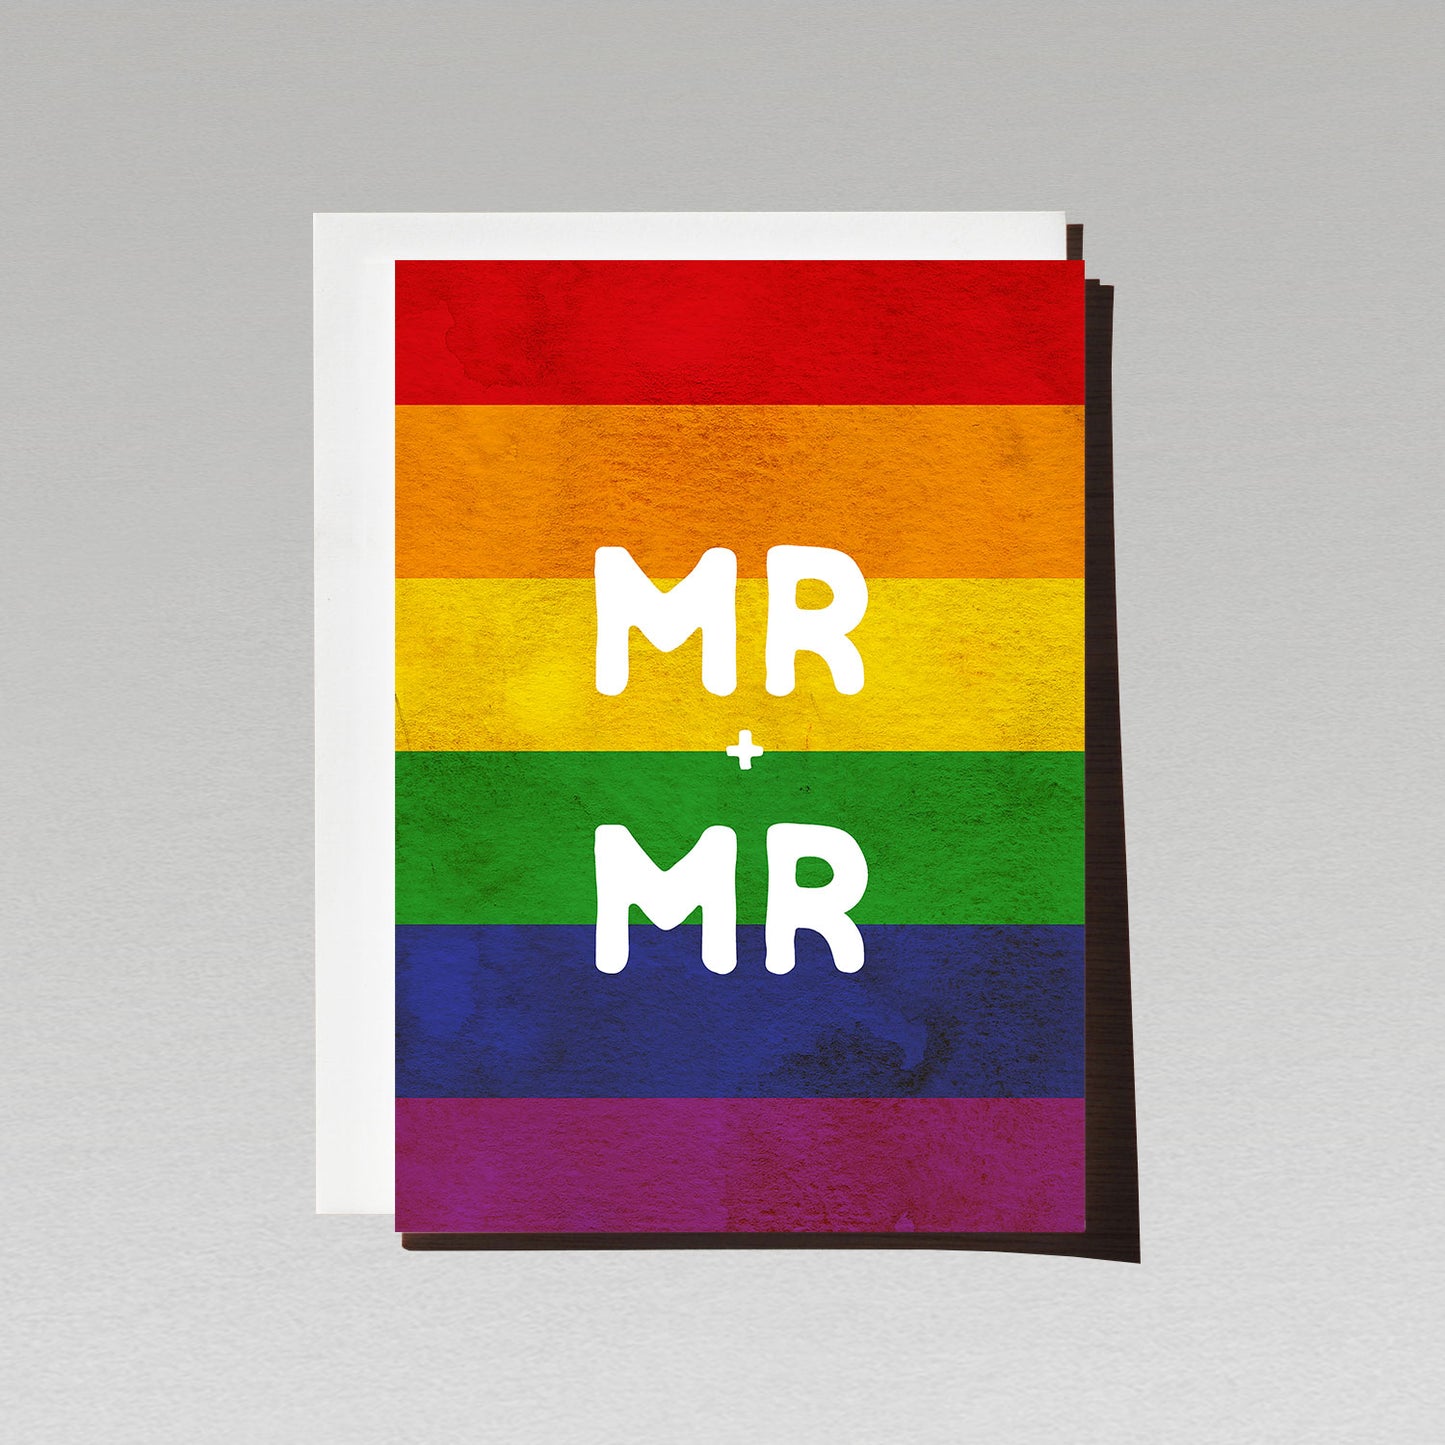 Greeting card with large white text Mr + Mr on LGBTQI rainbow flag background